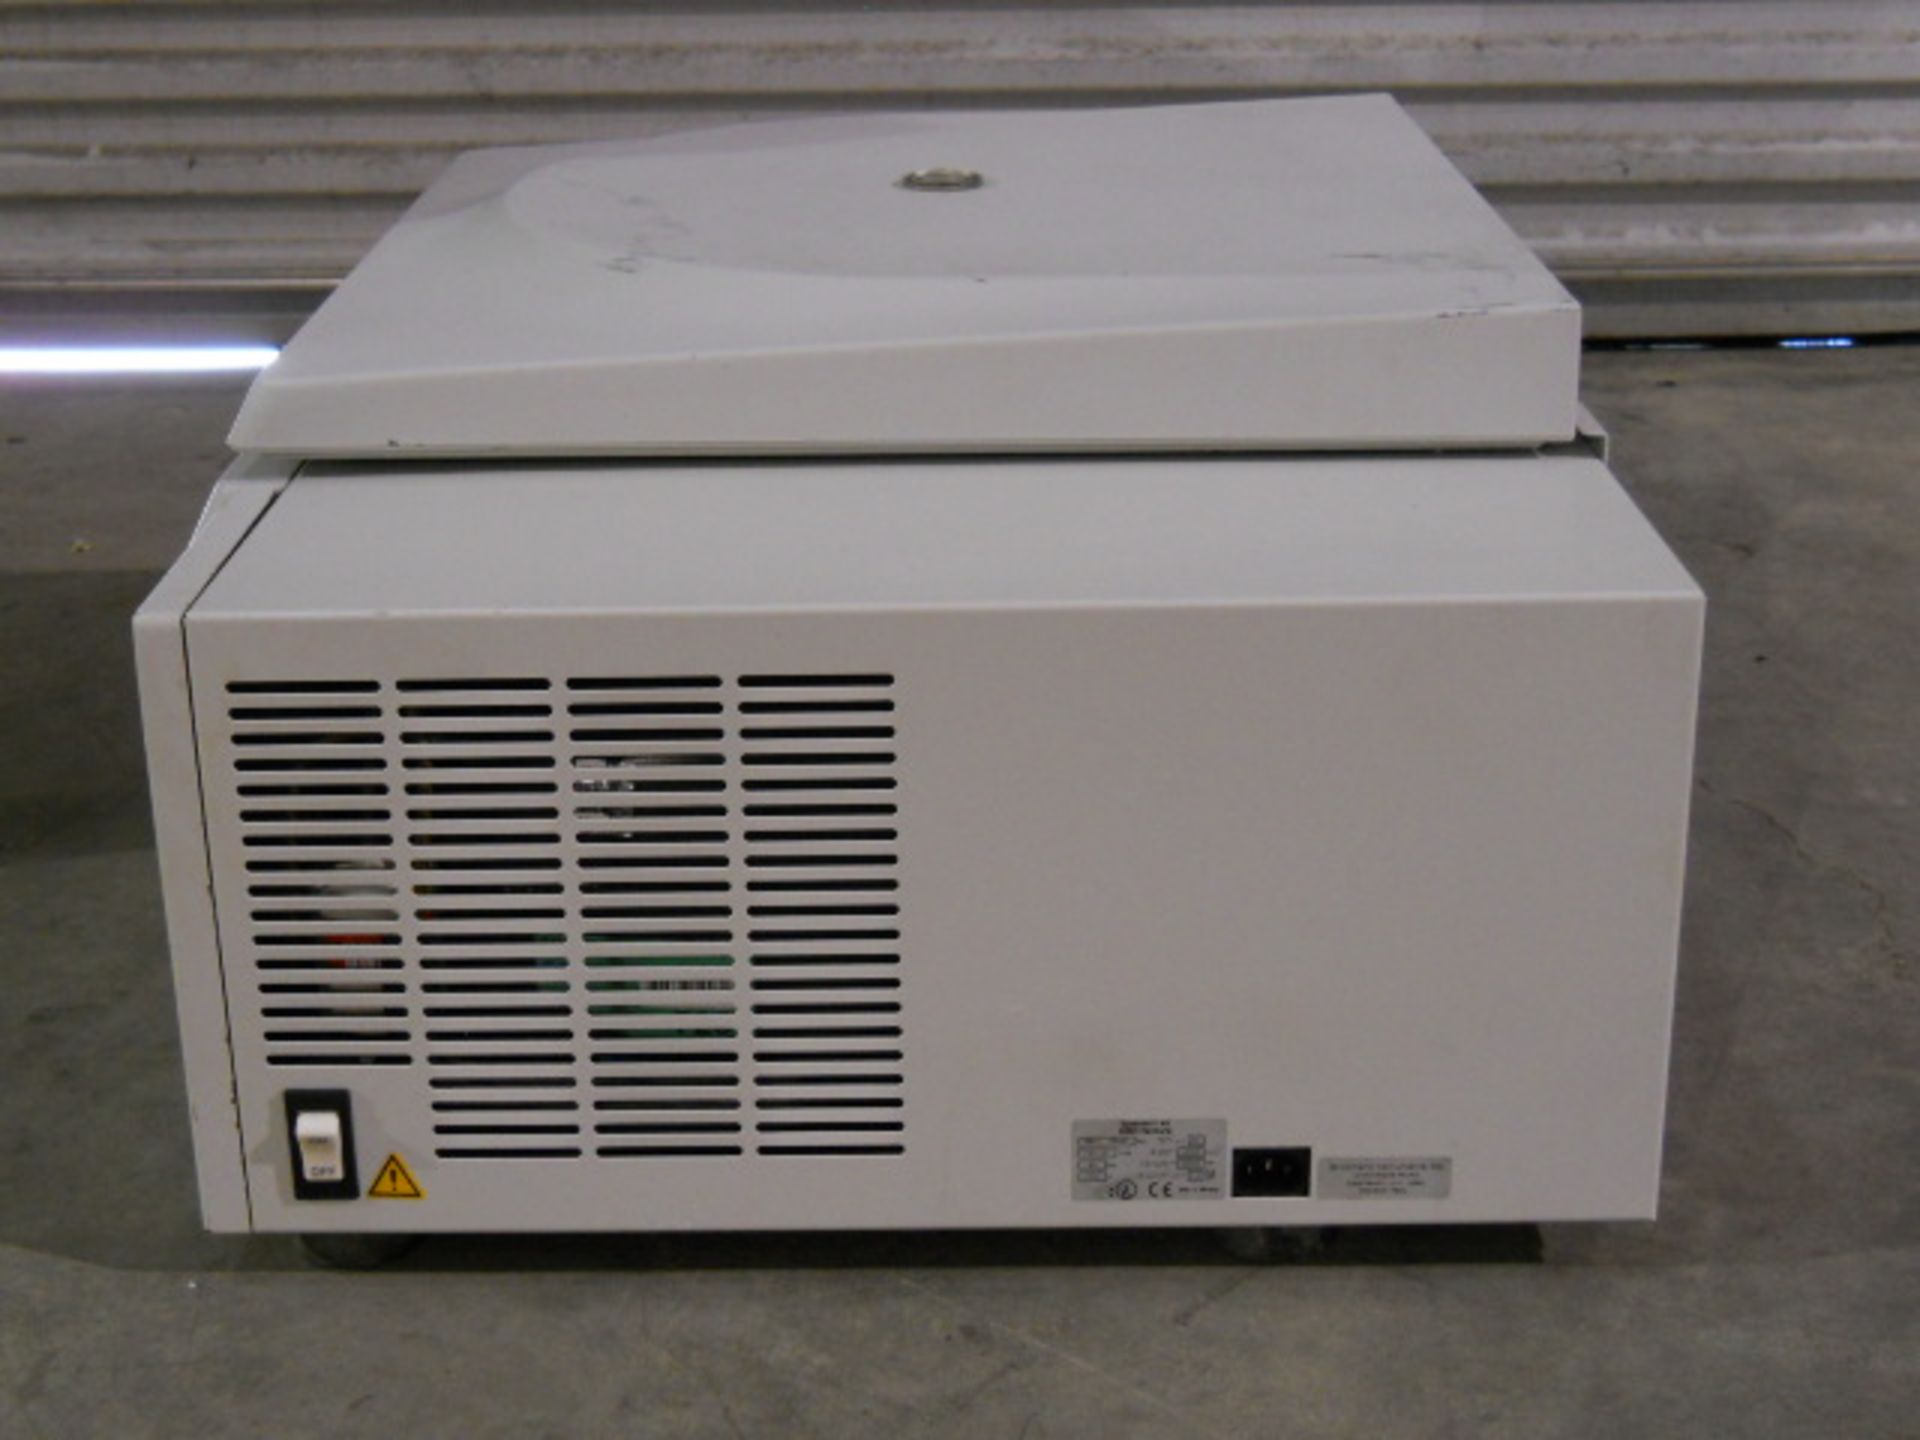 Eppendorf 5810R Refrigerated Centrifuge (For Parts Refridgerated), Qty 2, 332369478516 - Image 6 of 9